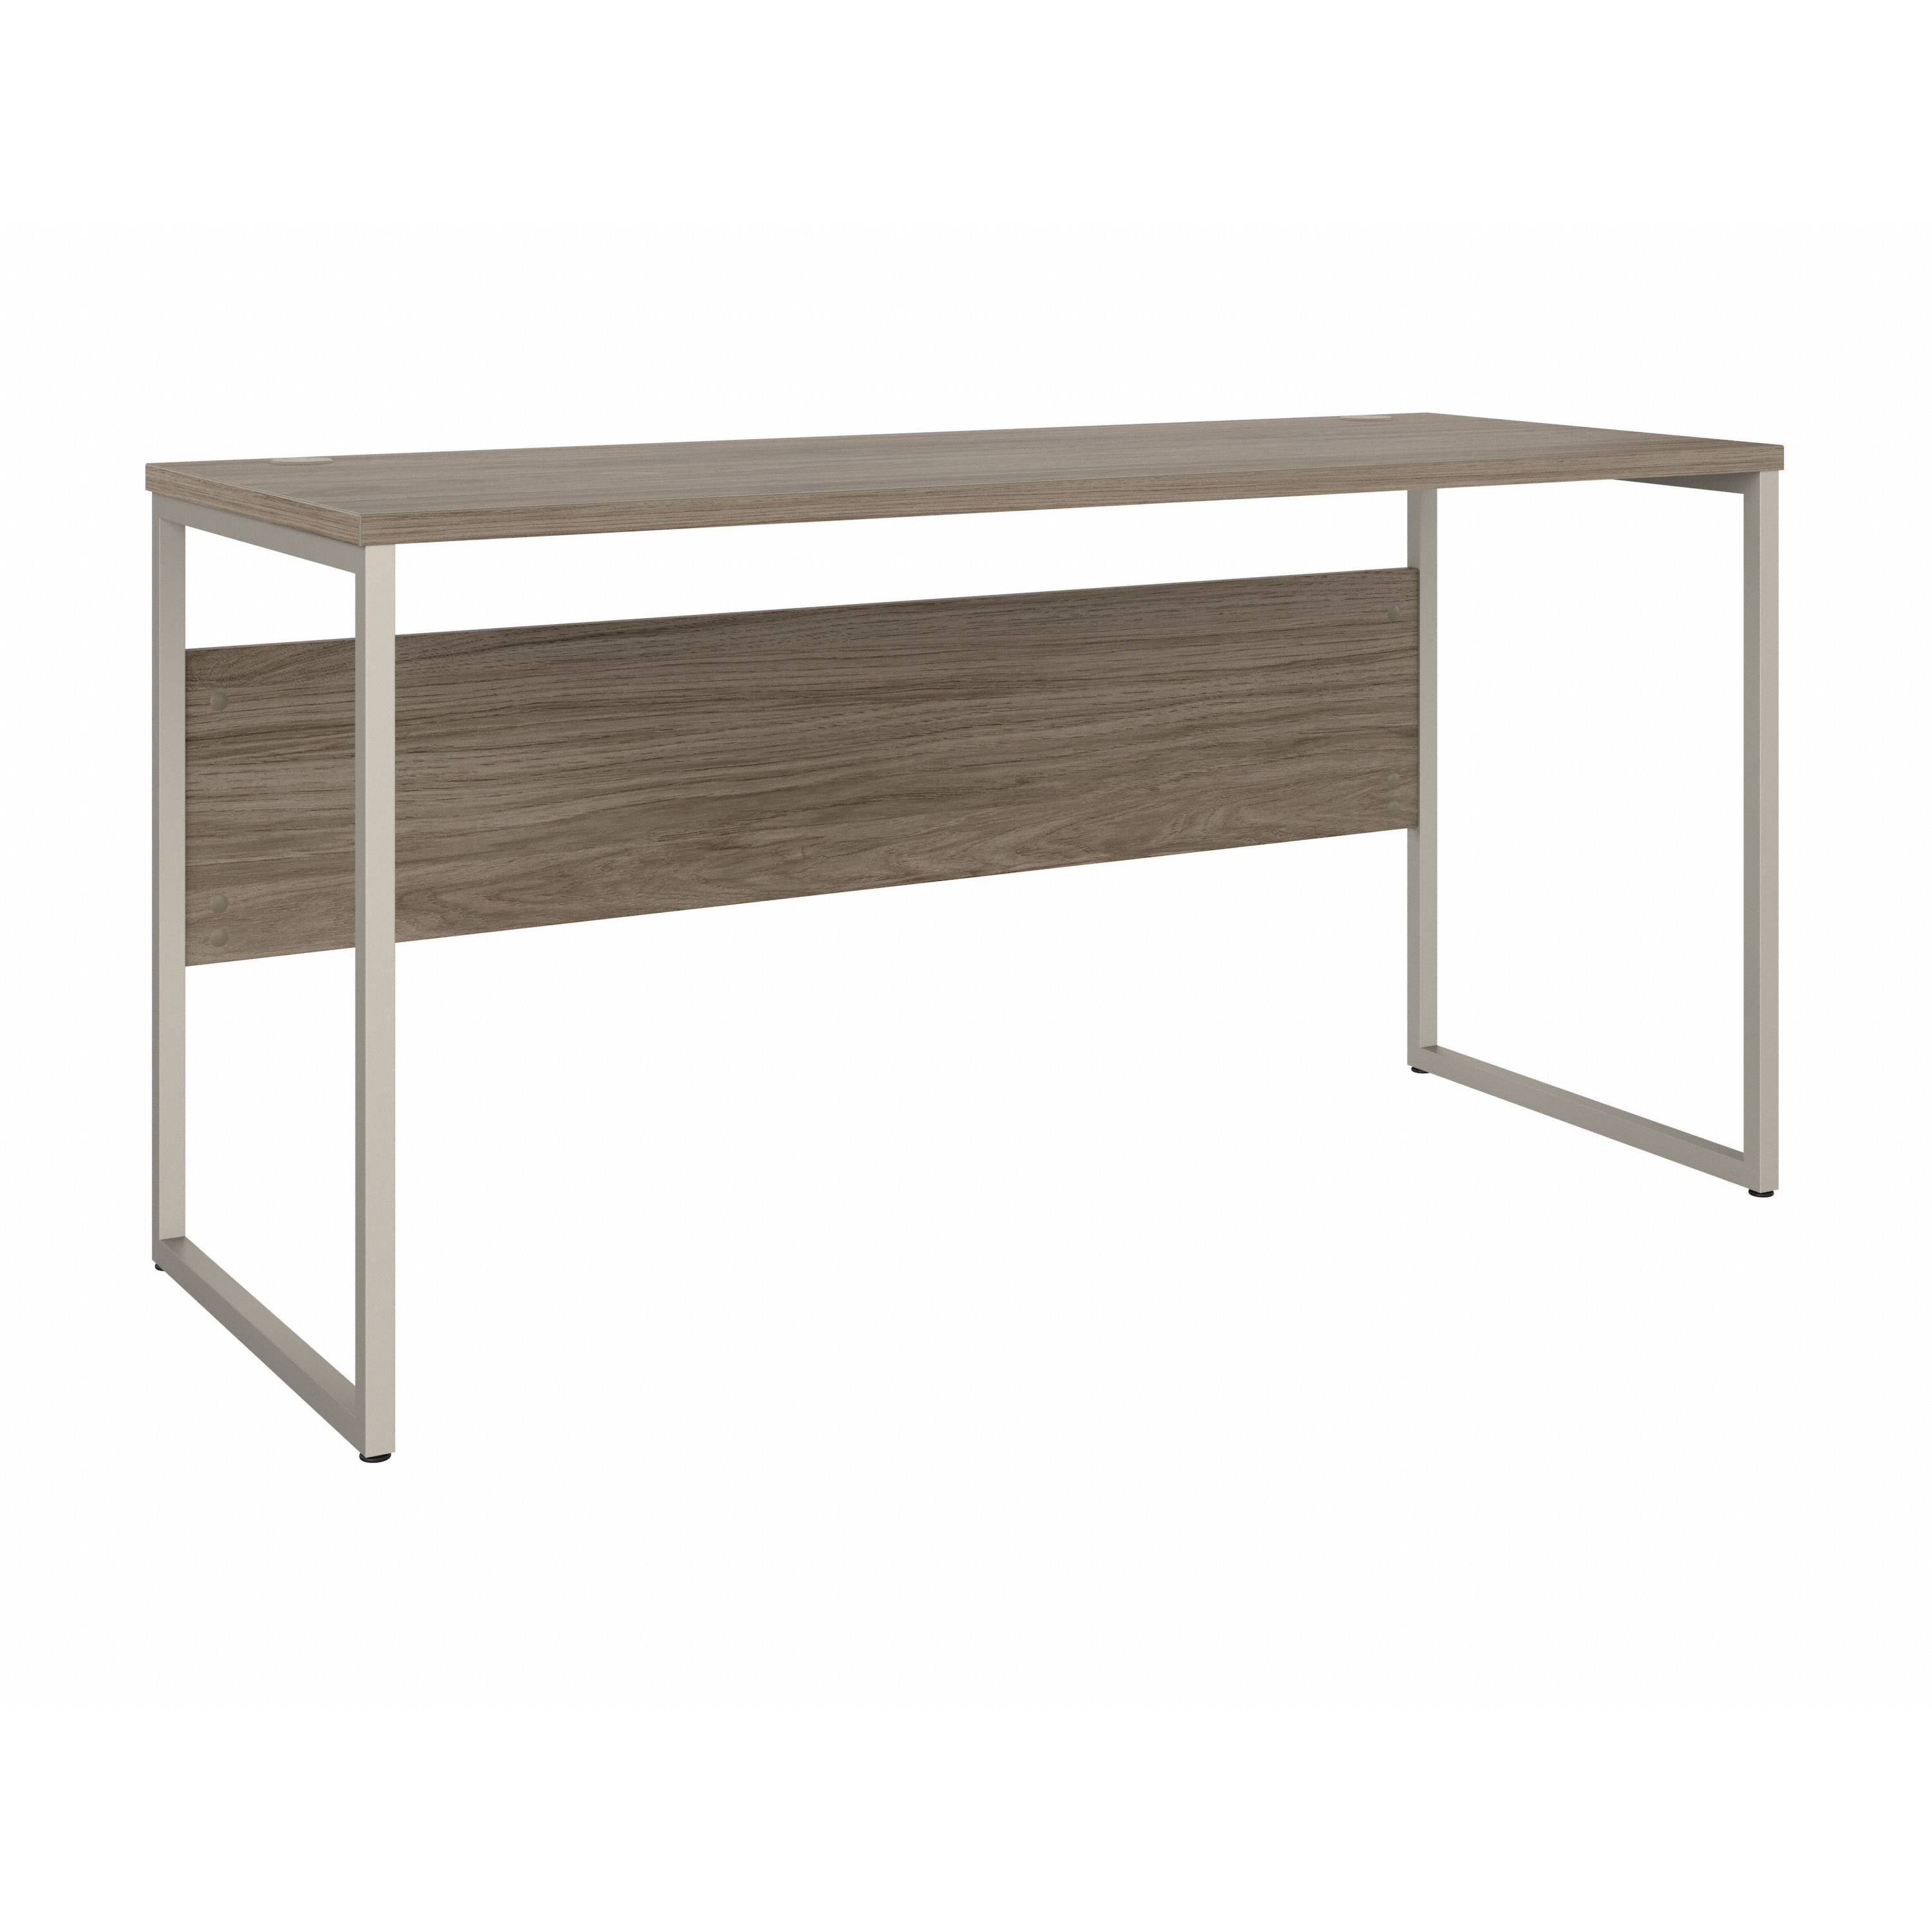 Shop Bush Business Furniture Hybrid 60W x 24D Computer Table Desk with Metal Legs 02 HYD260MH #color_modern hickory